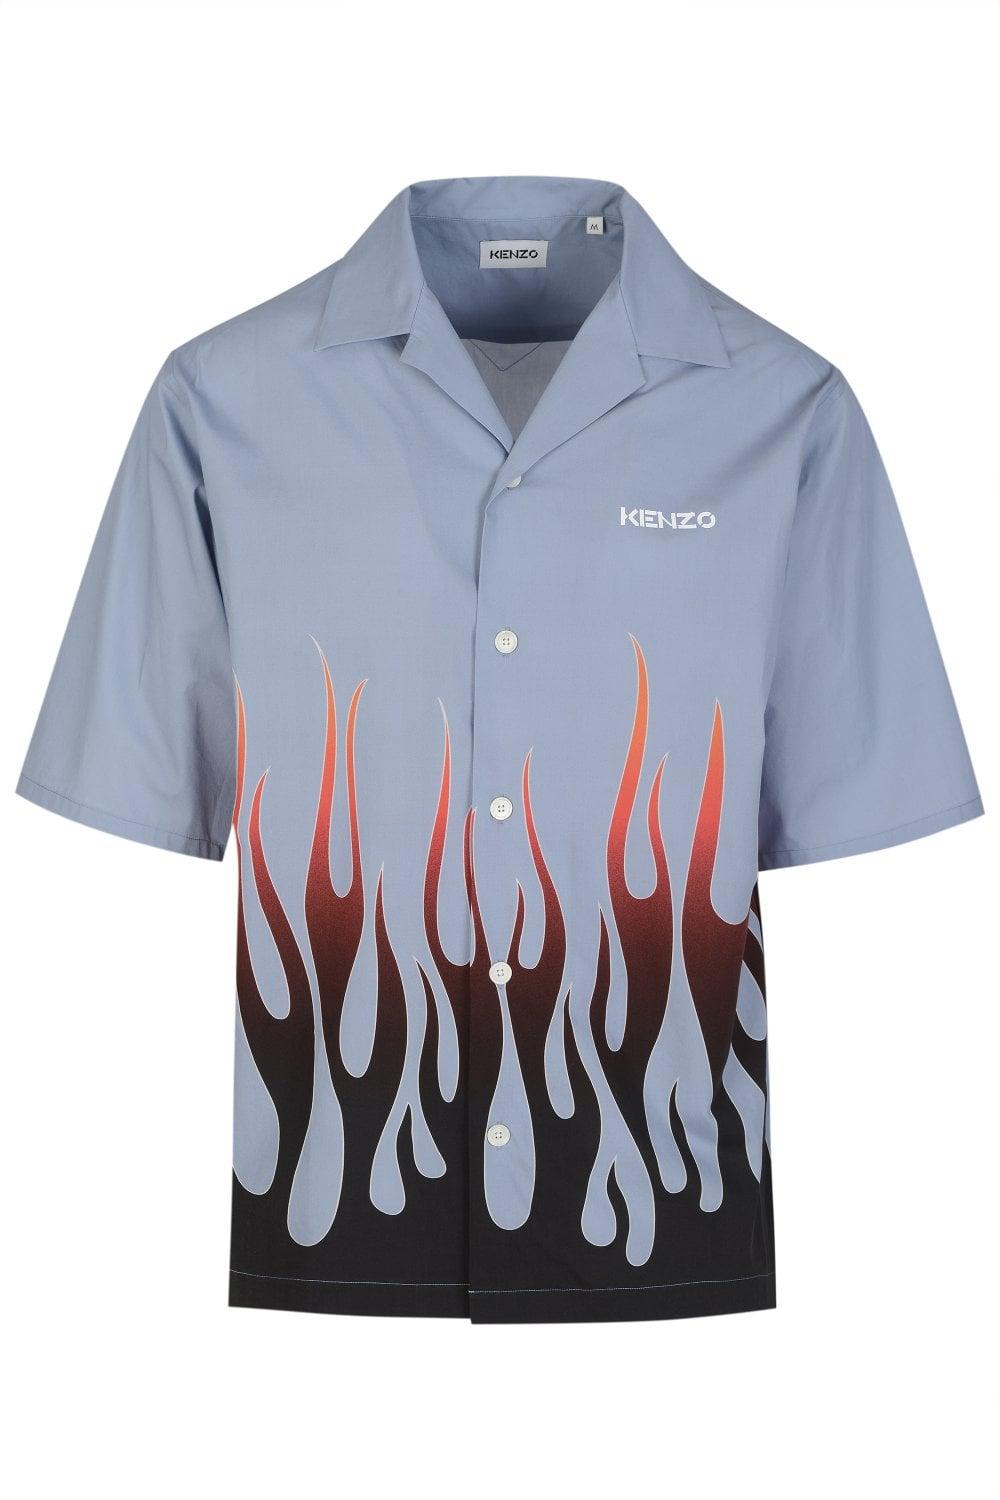 KENZO Flame Shirt in Blue for Men | Lyst